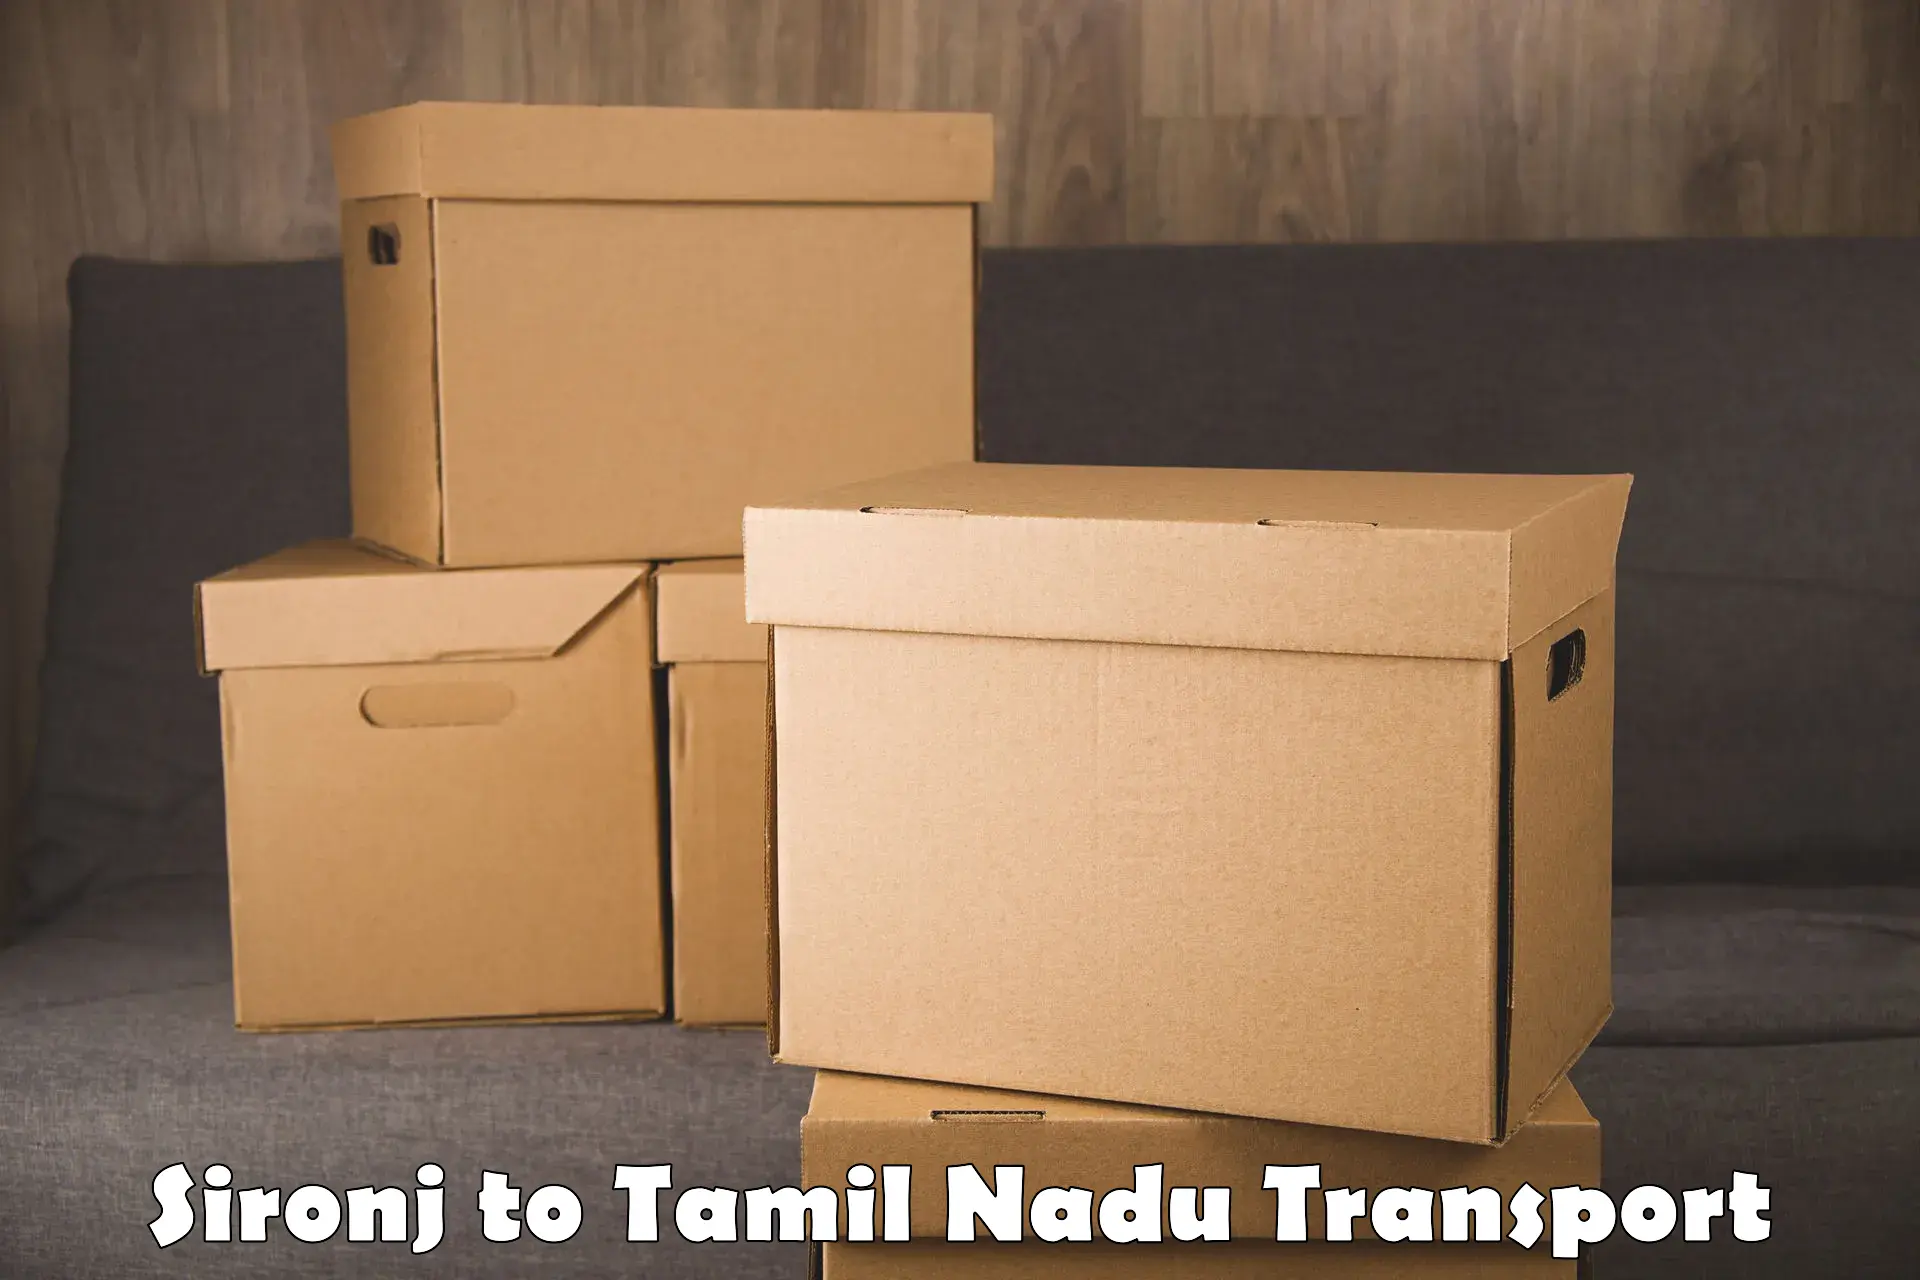 Container transportation services Sironj to Tamil Nadu